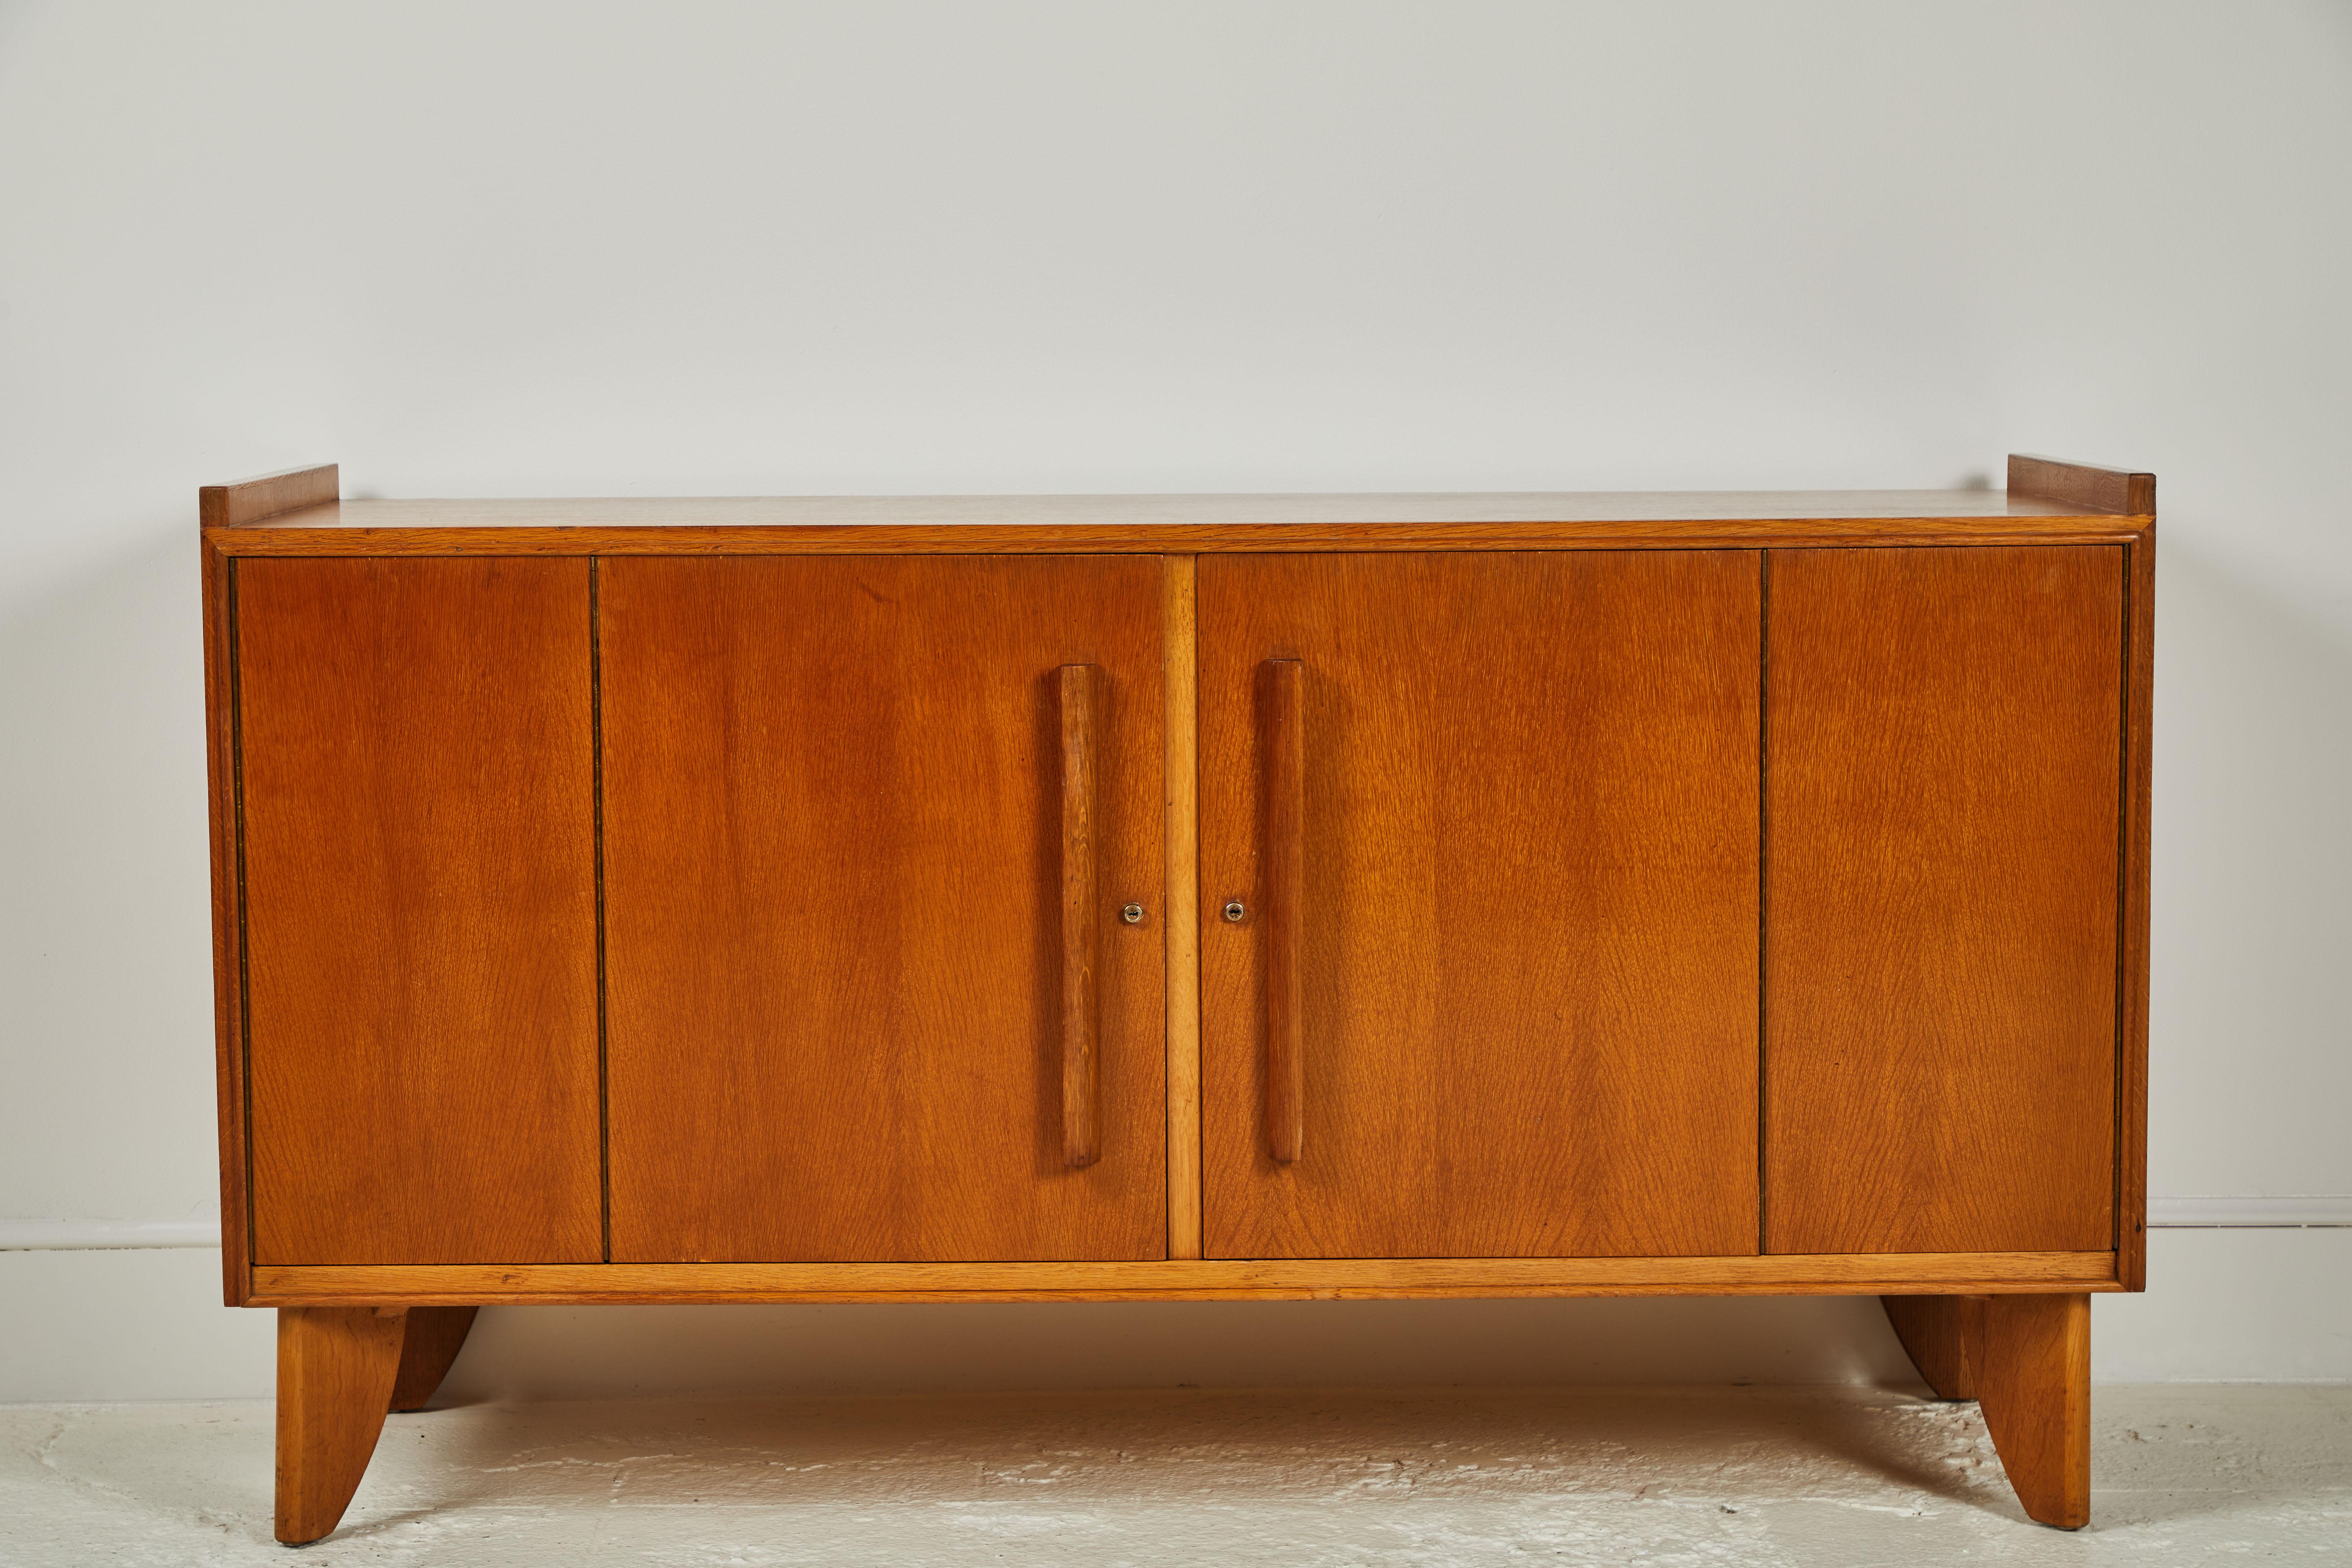 French midcentury oak credenza with beautifully bi folding doors. Inside details offer wooden pullout / pull-out drawers.